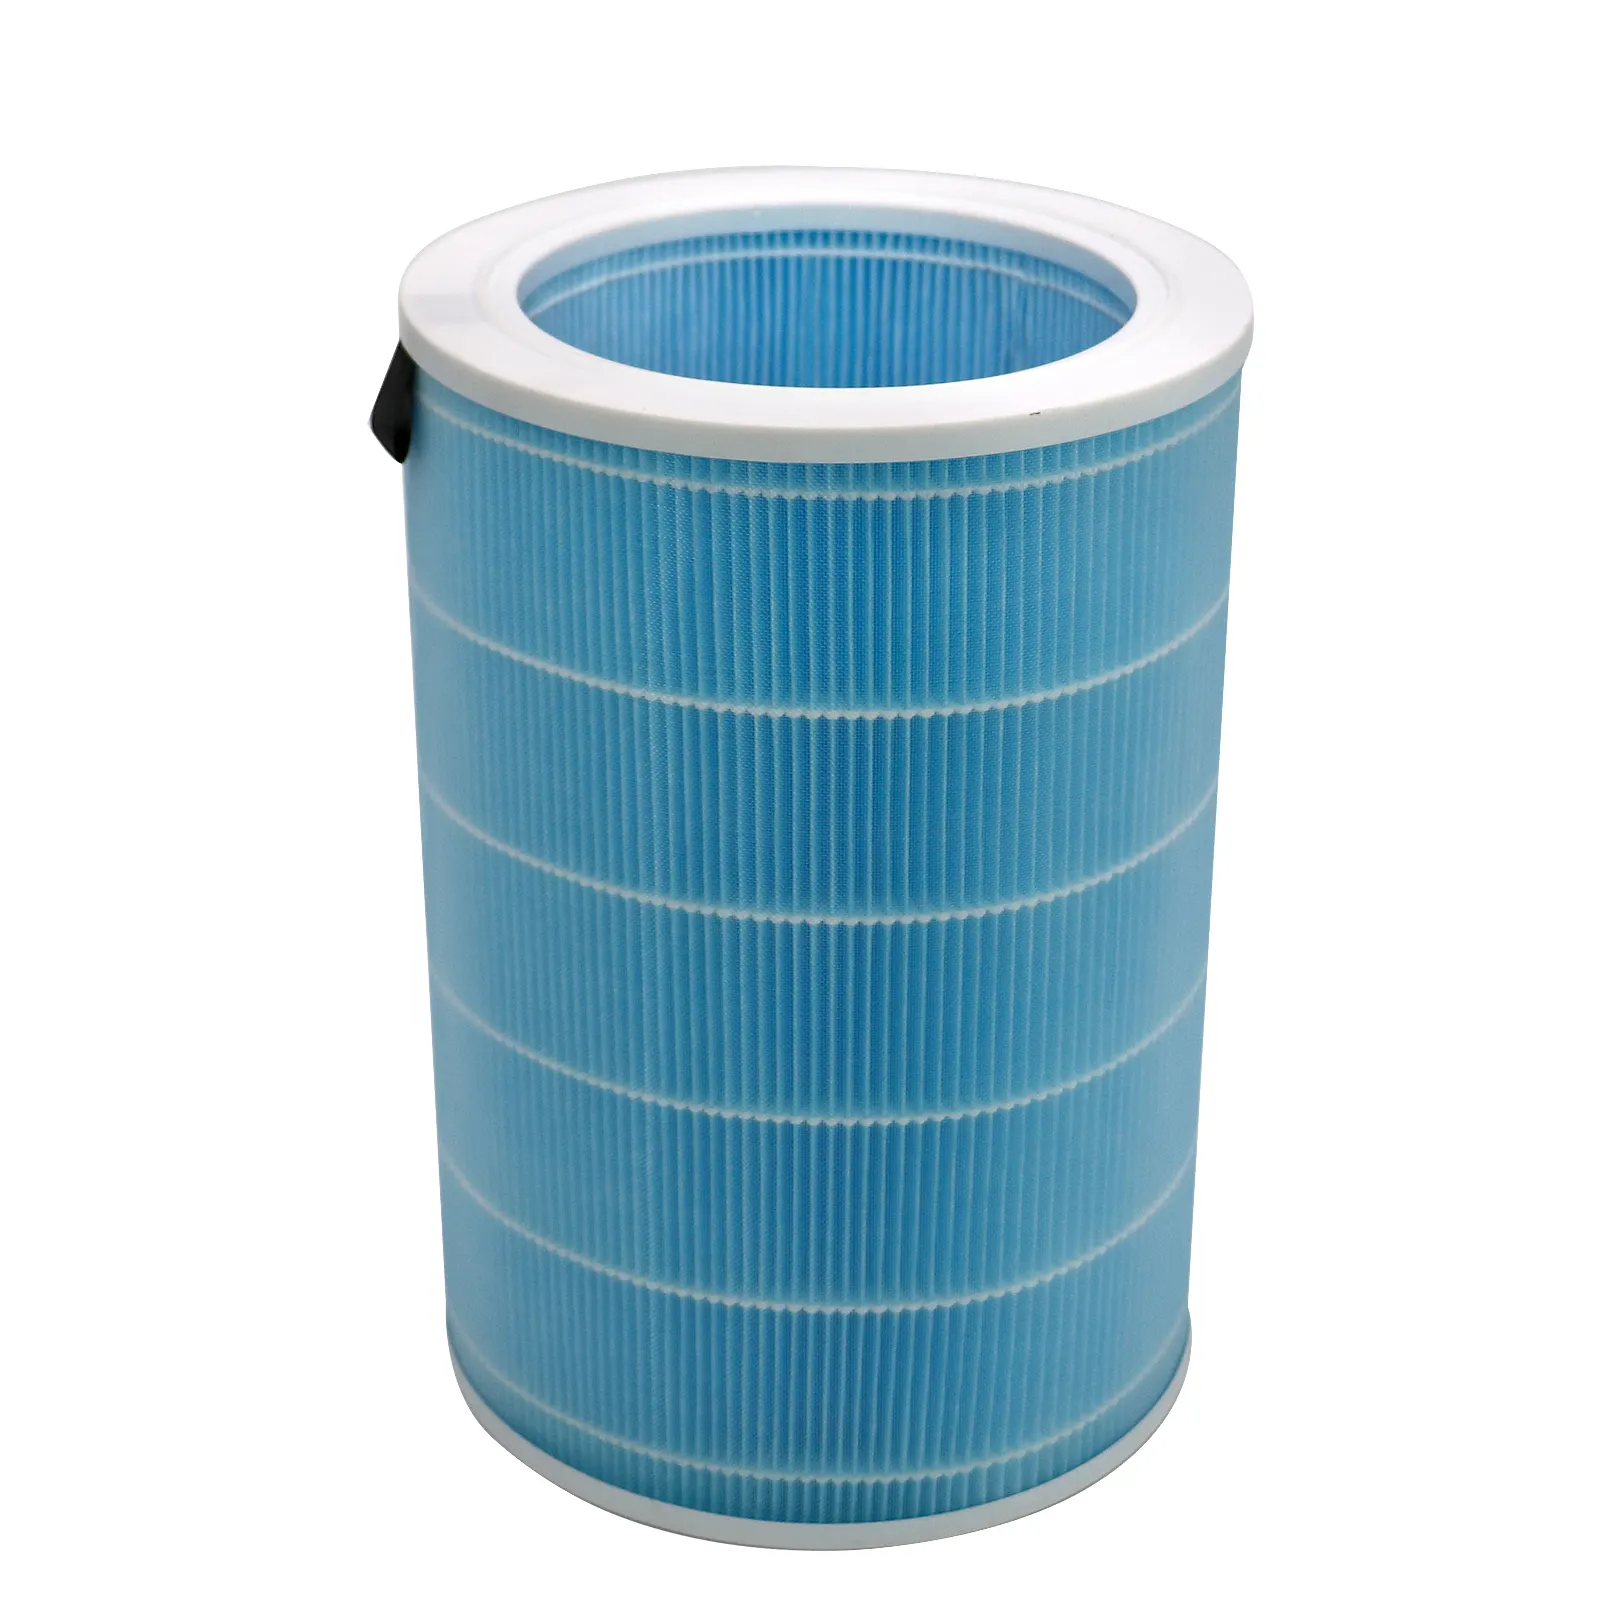 Activated Carbon Filter For Xiaomi Air Purifier 2/ 2S/3/PRO Filter Air Cleaner Intelligent Mi Air Purifier